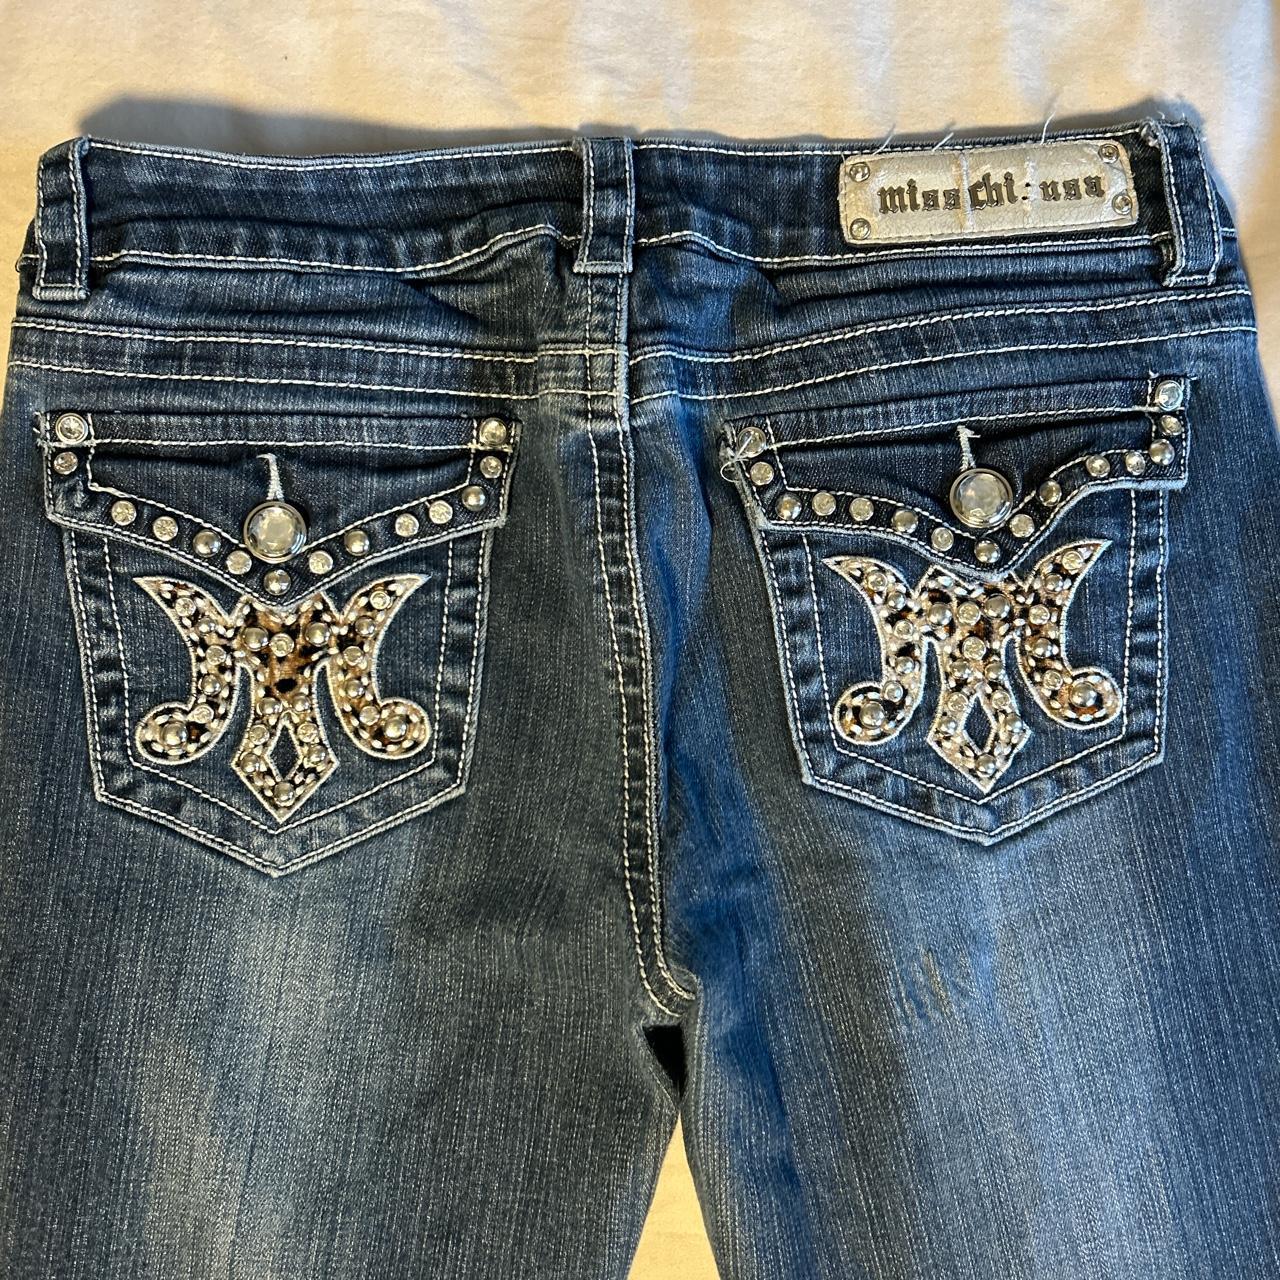 Miss chic cheetah print flare jeans! Super cute and... - Depop